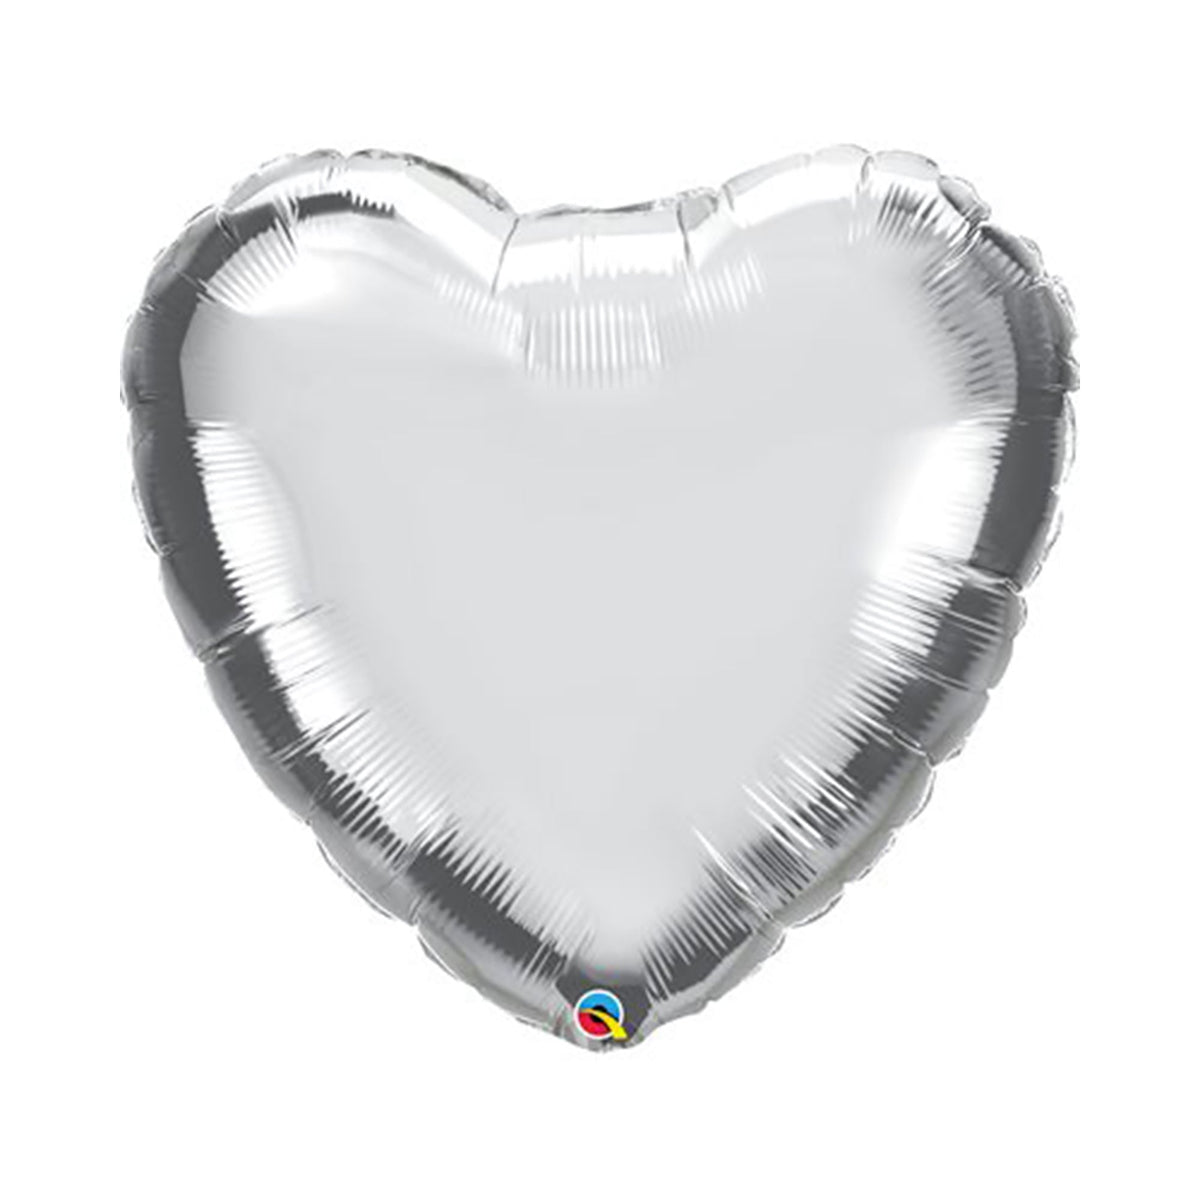 LE GROUPE BLC INTL INC Balloons Silver Heart Supershape Foil Balloon, 36 Inches, 1 Count